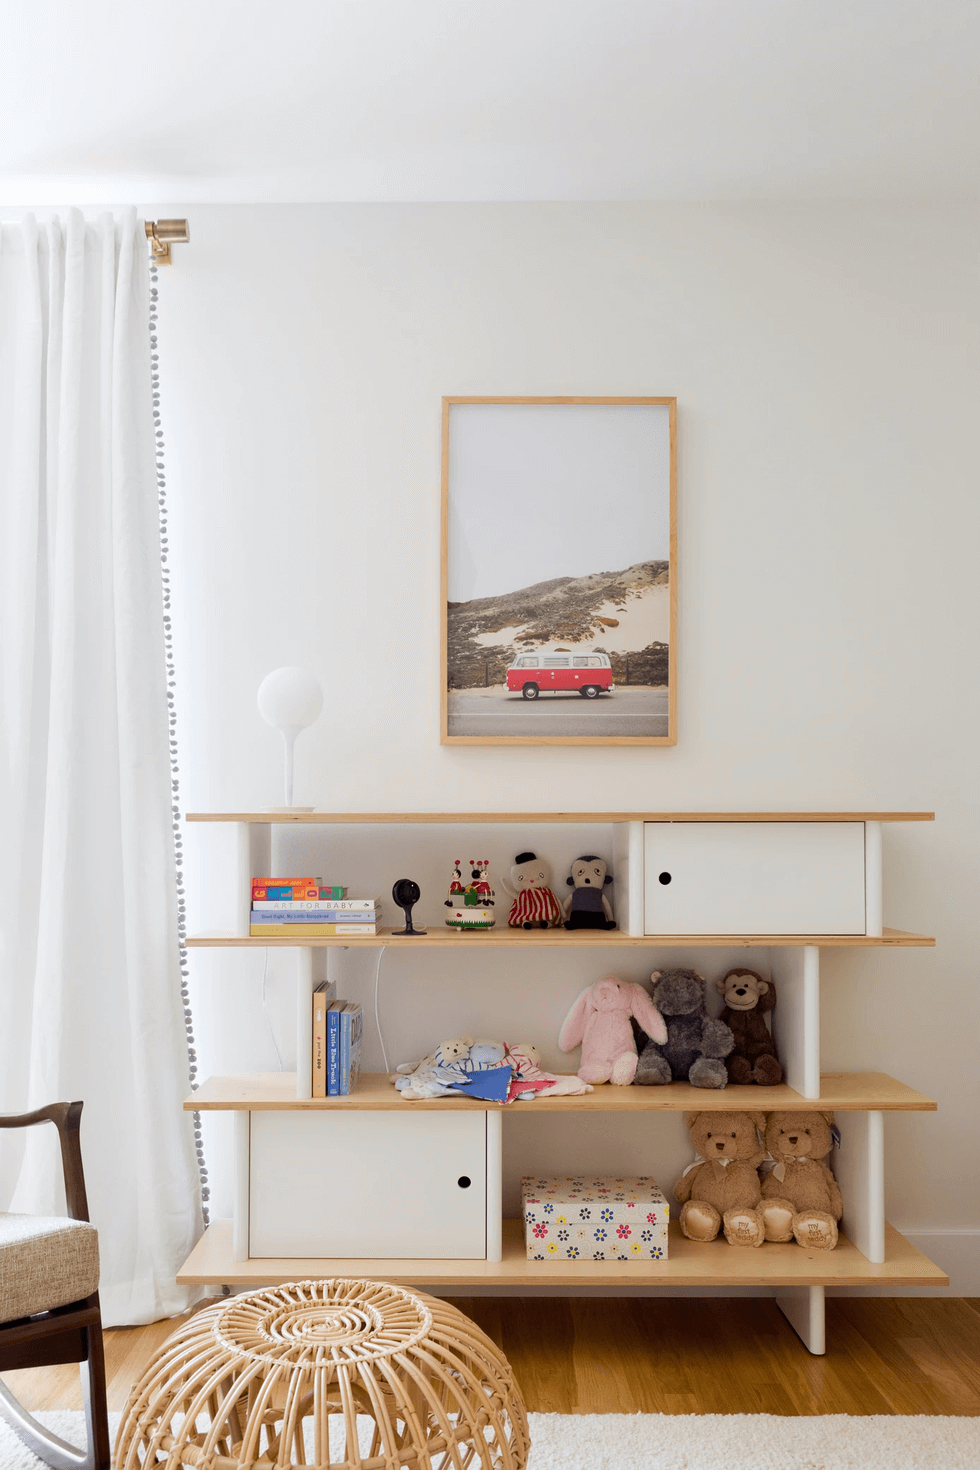 Fun with shelves - Clever DIY Toy Storage & Organization Ideas & Projects For Kids